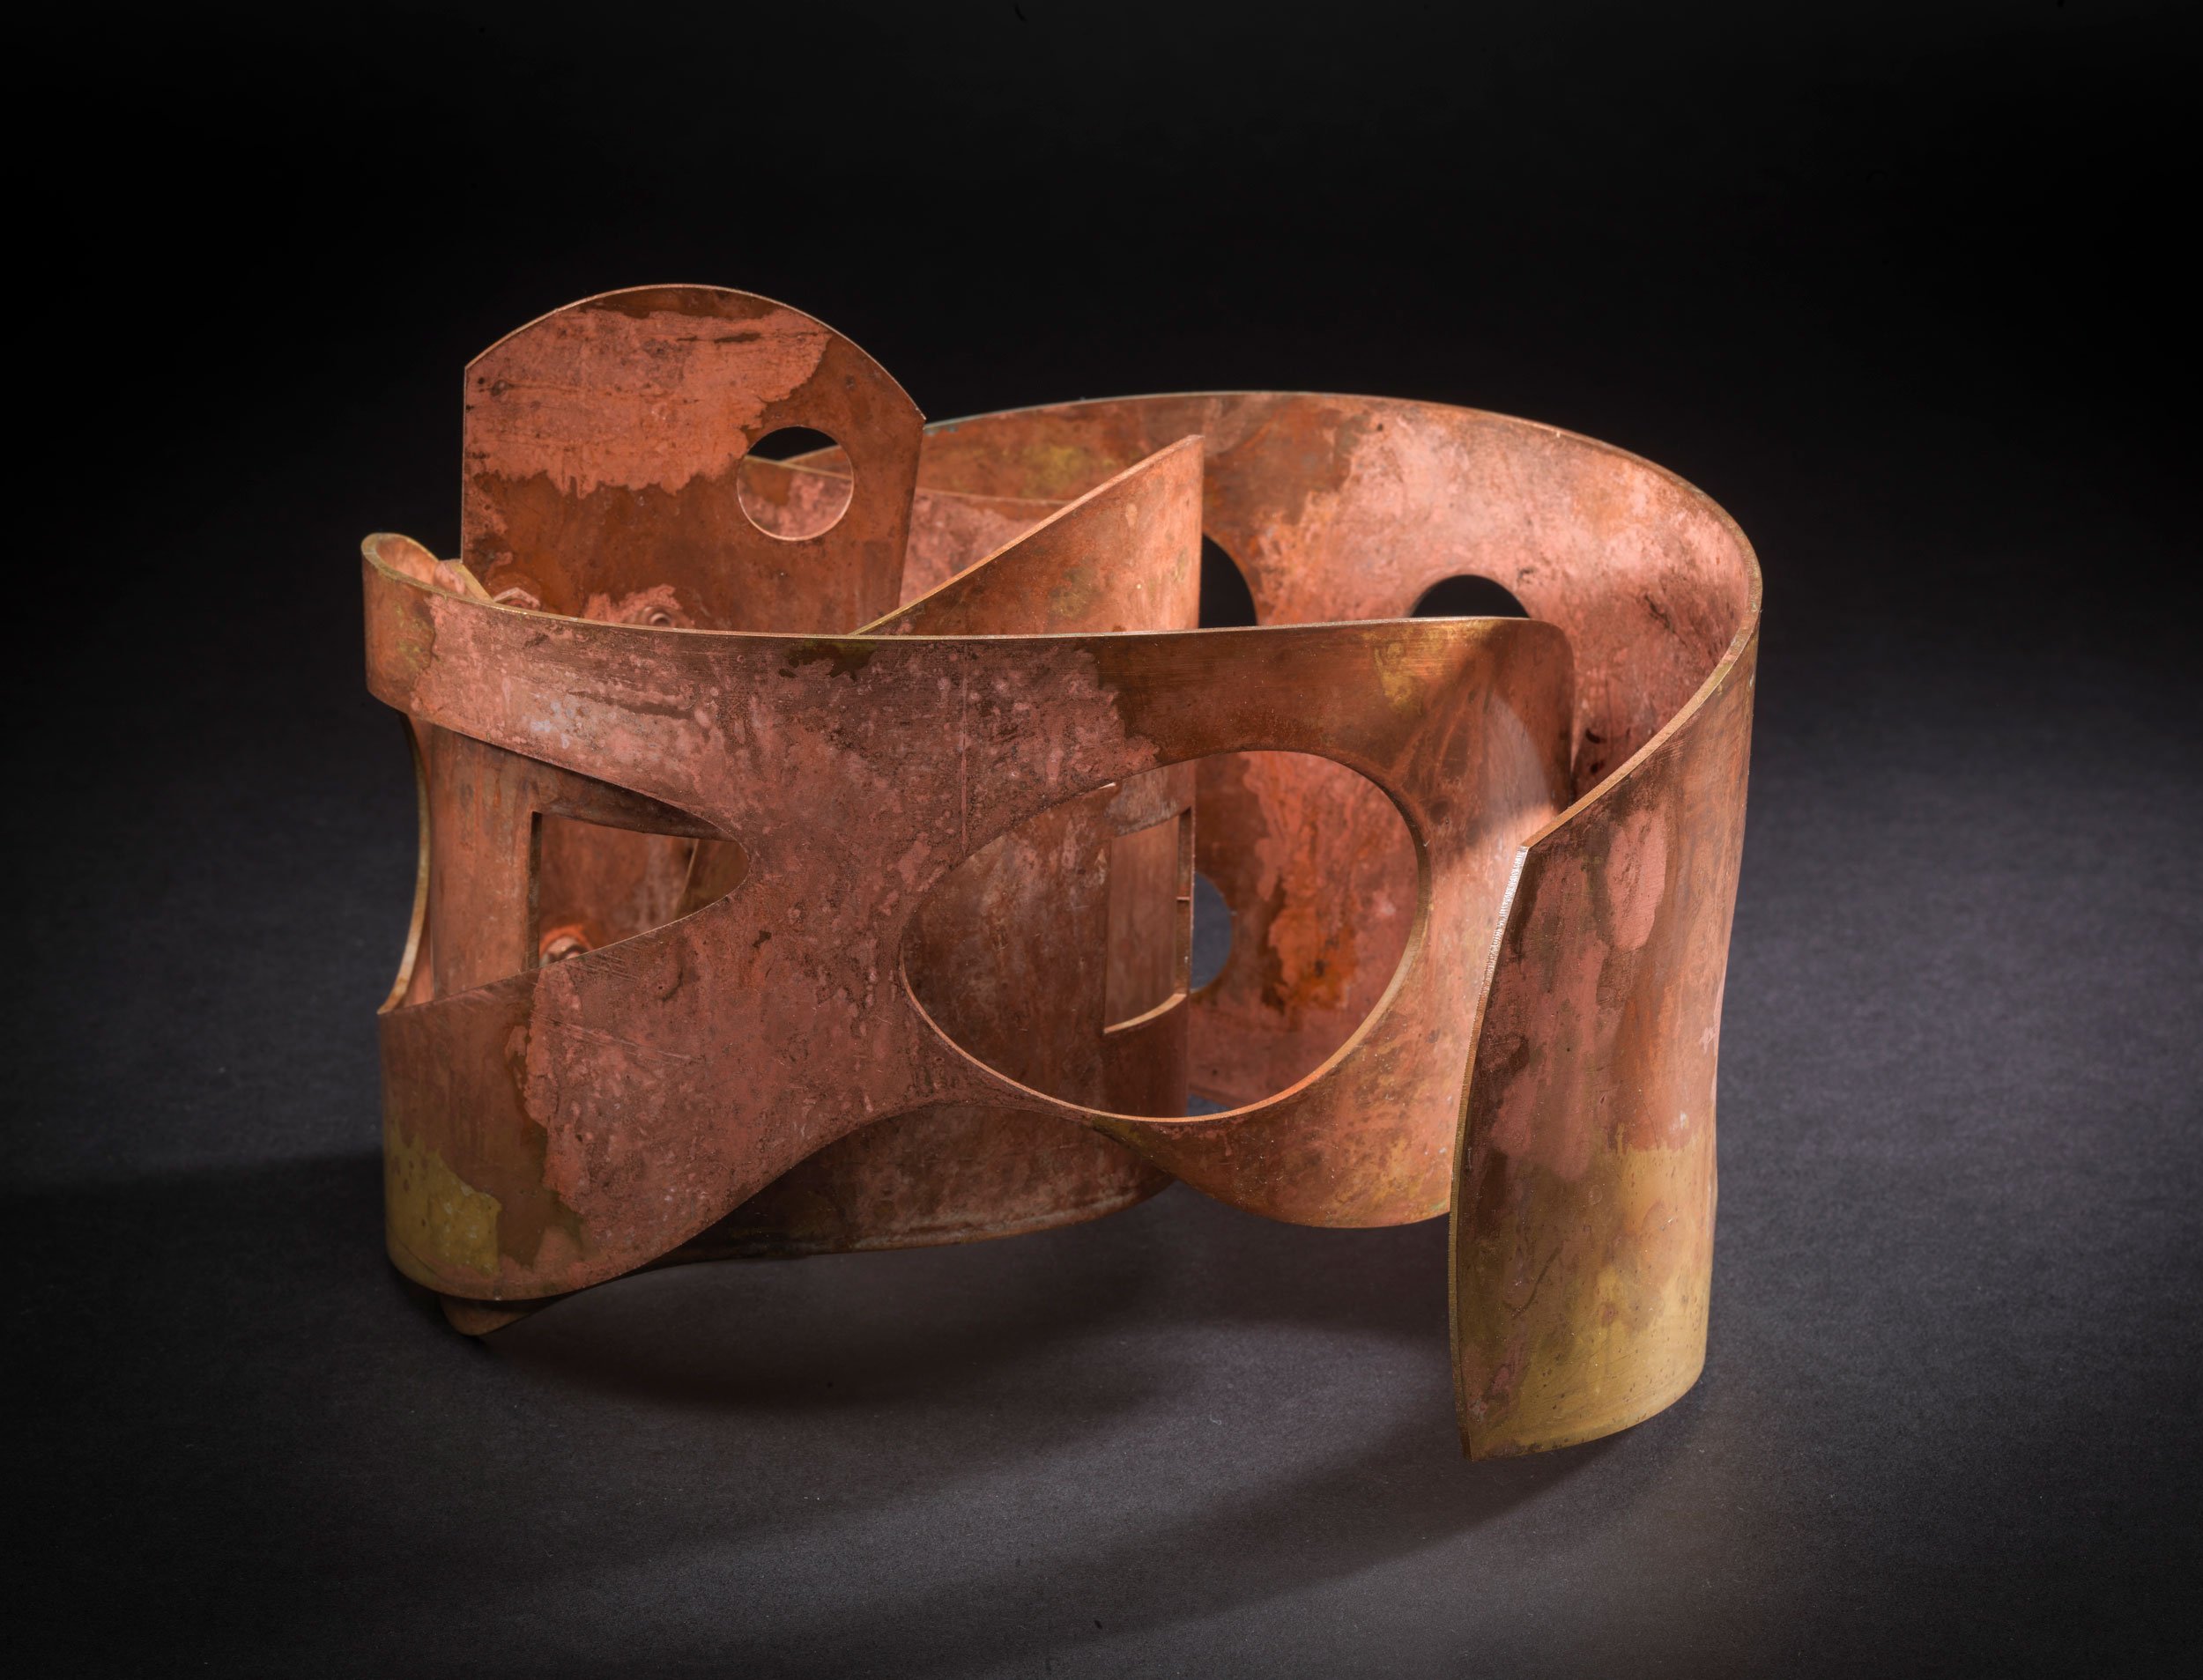 Act-of-Instance-No.-5,-2020,-patinated-brass,-22x16x17cm,-JL270820_0094-(1).jpg